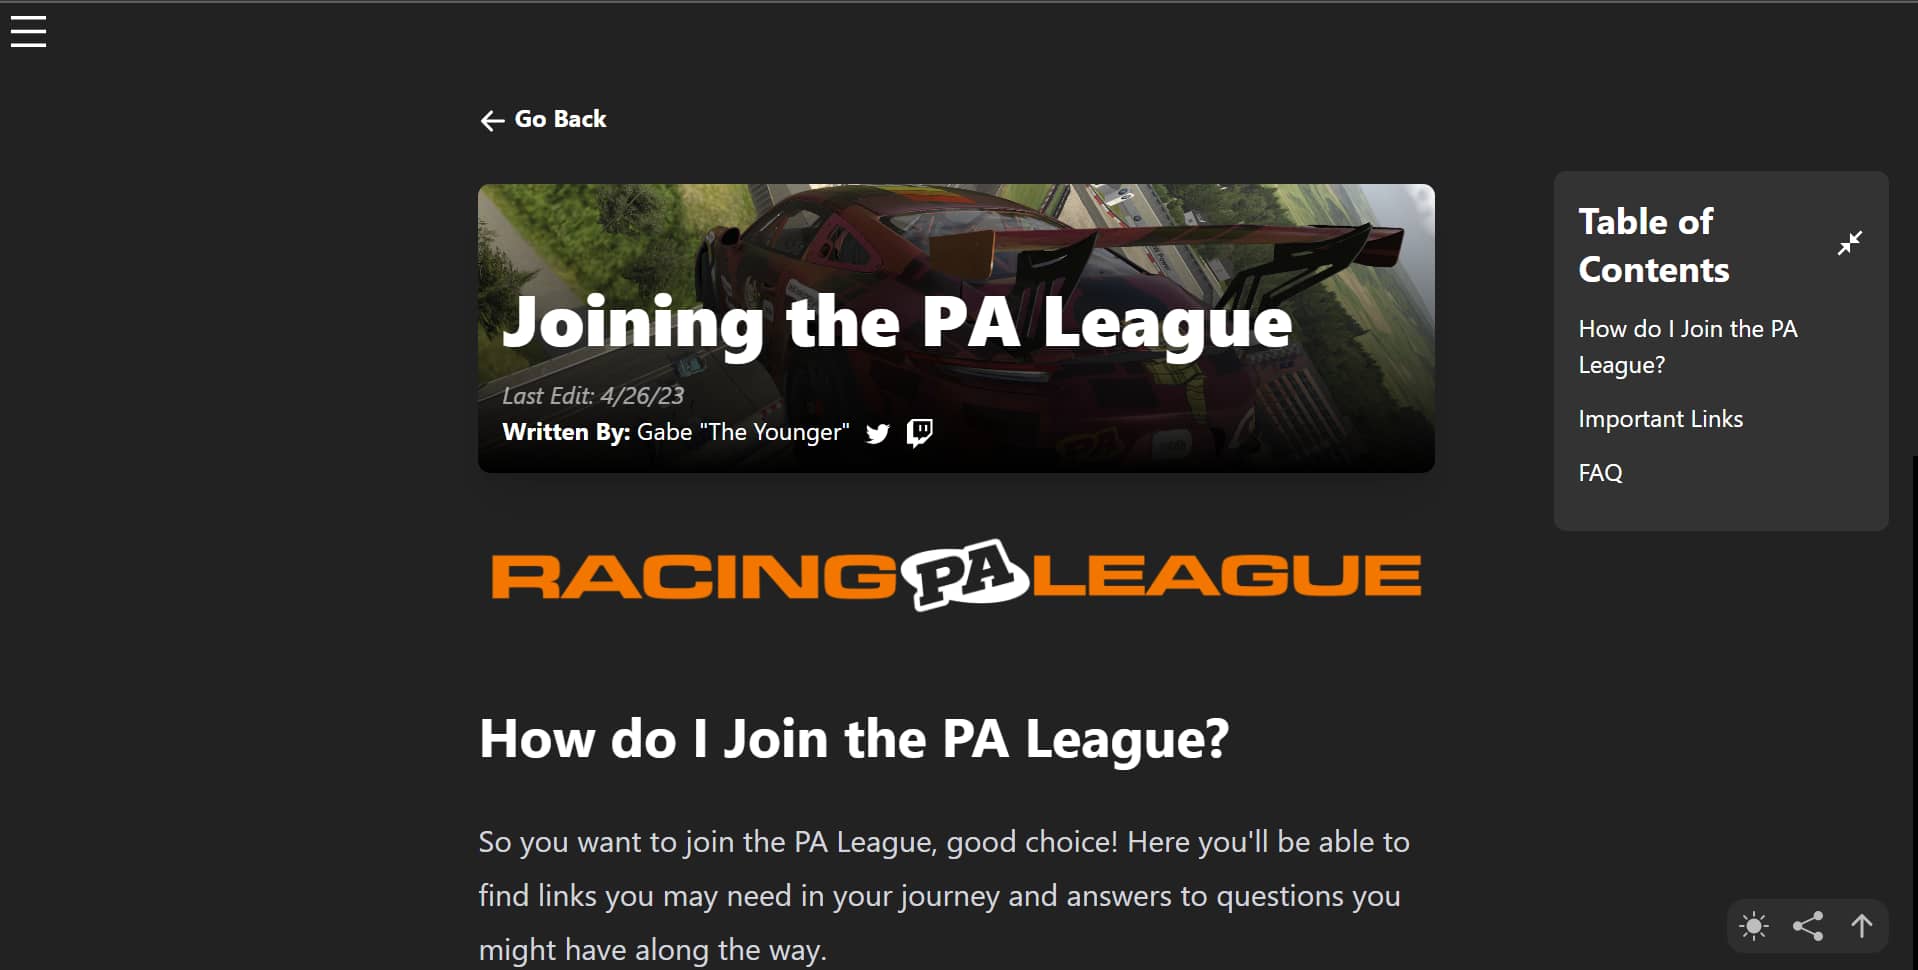 Preview of the joining the league page